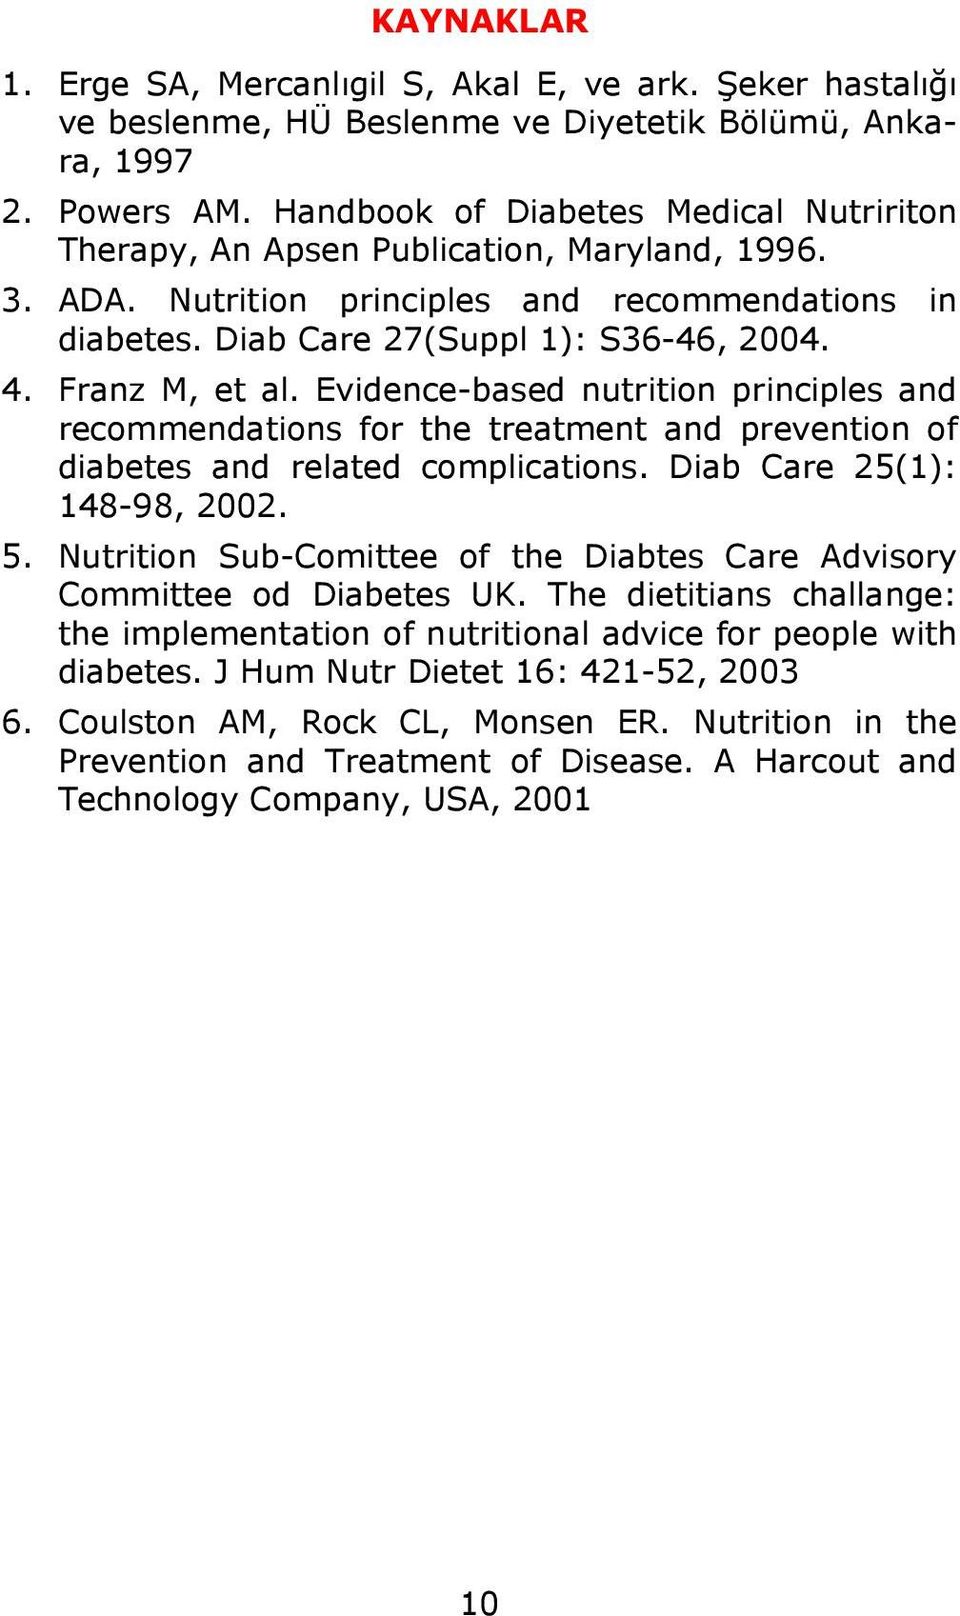 Franz M, et al. Evidence-based nutrition principles and recommendations for the treatment and prevention of diabetes and related complications. Diab Care 25(1): 148-98, 2002. 5.